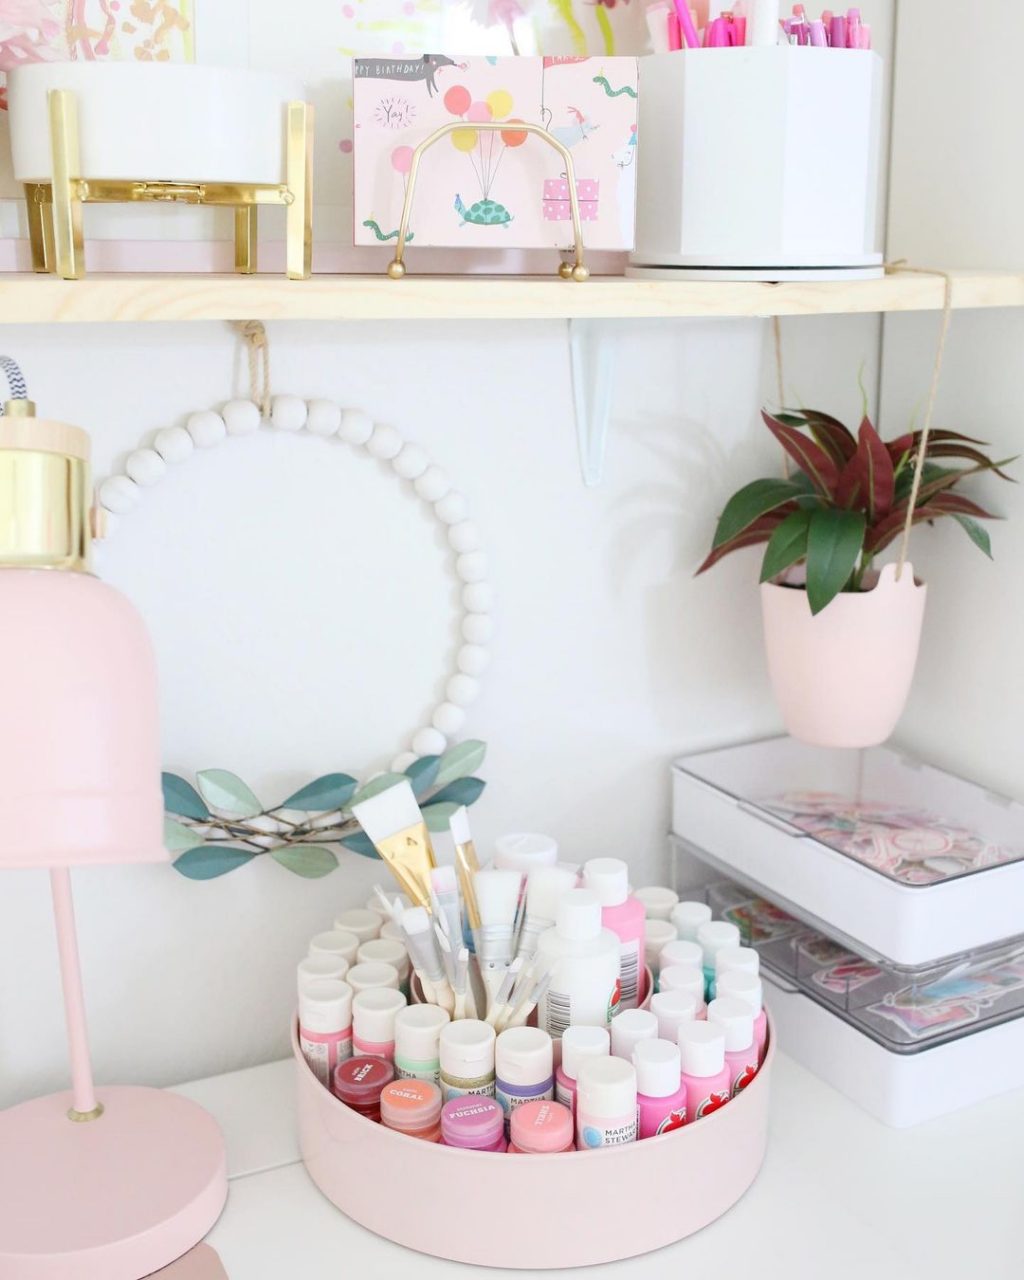 Spring Cleaning Your Craft Space: Organization and Storage Ideas